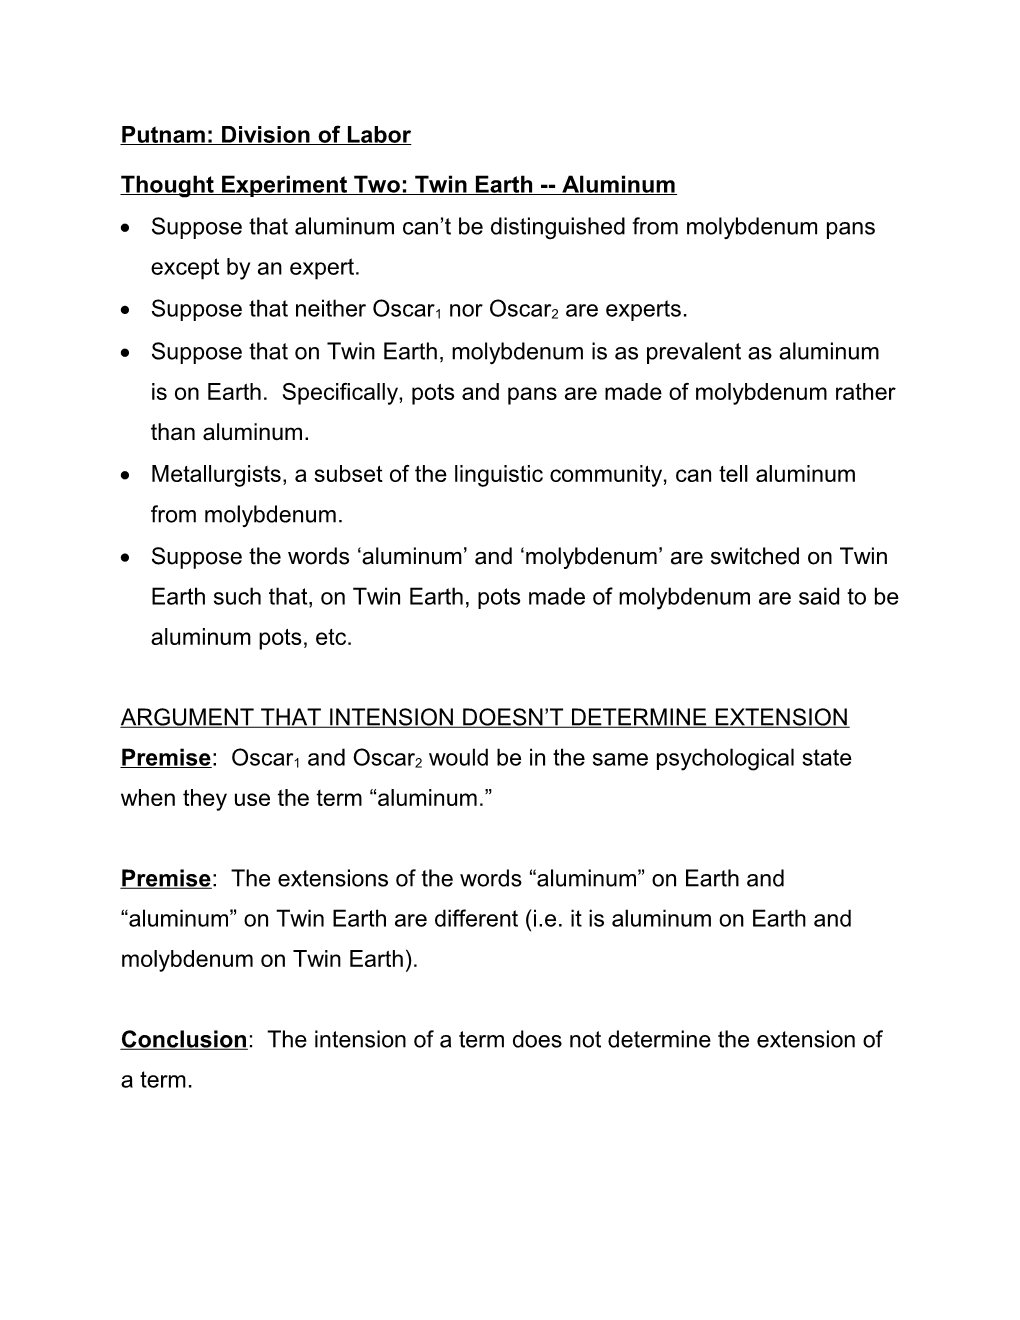 Thought Experiment Two: Twin Earth Aluminum